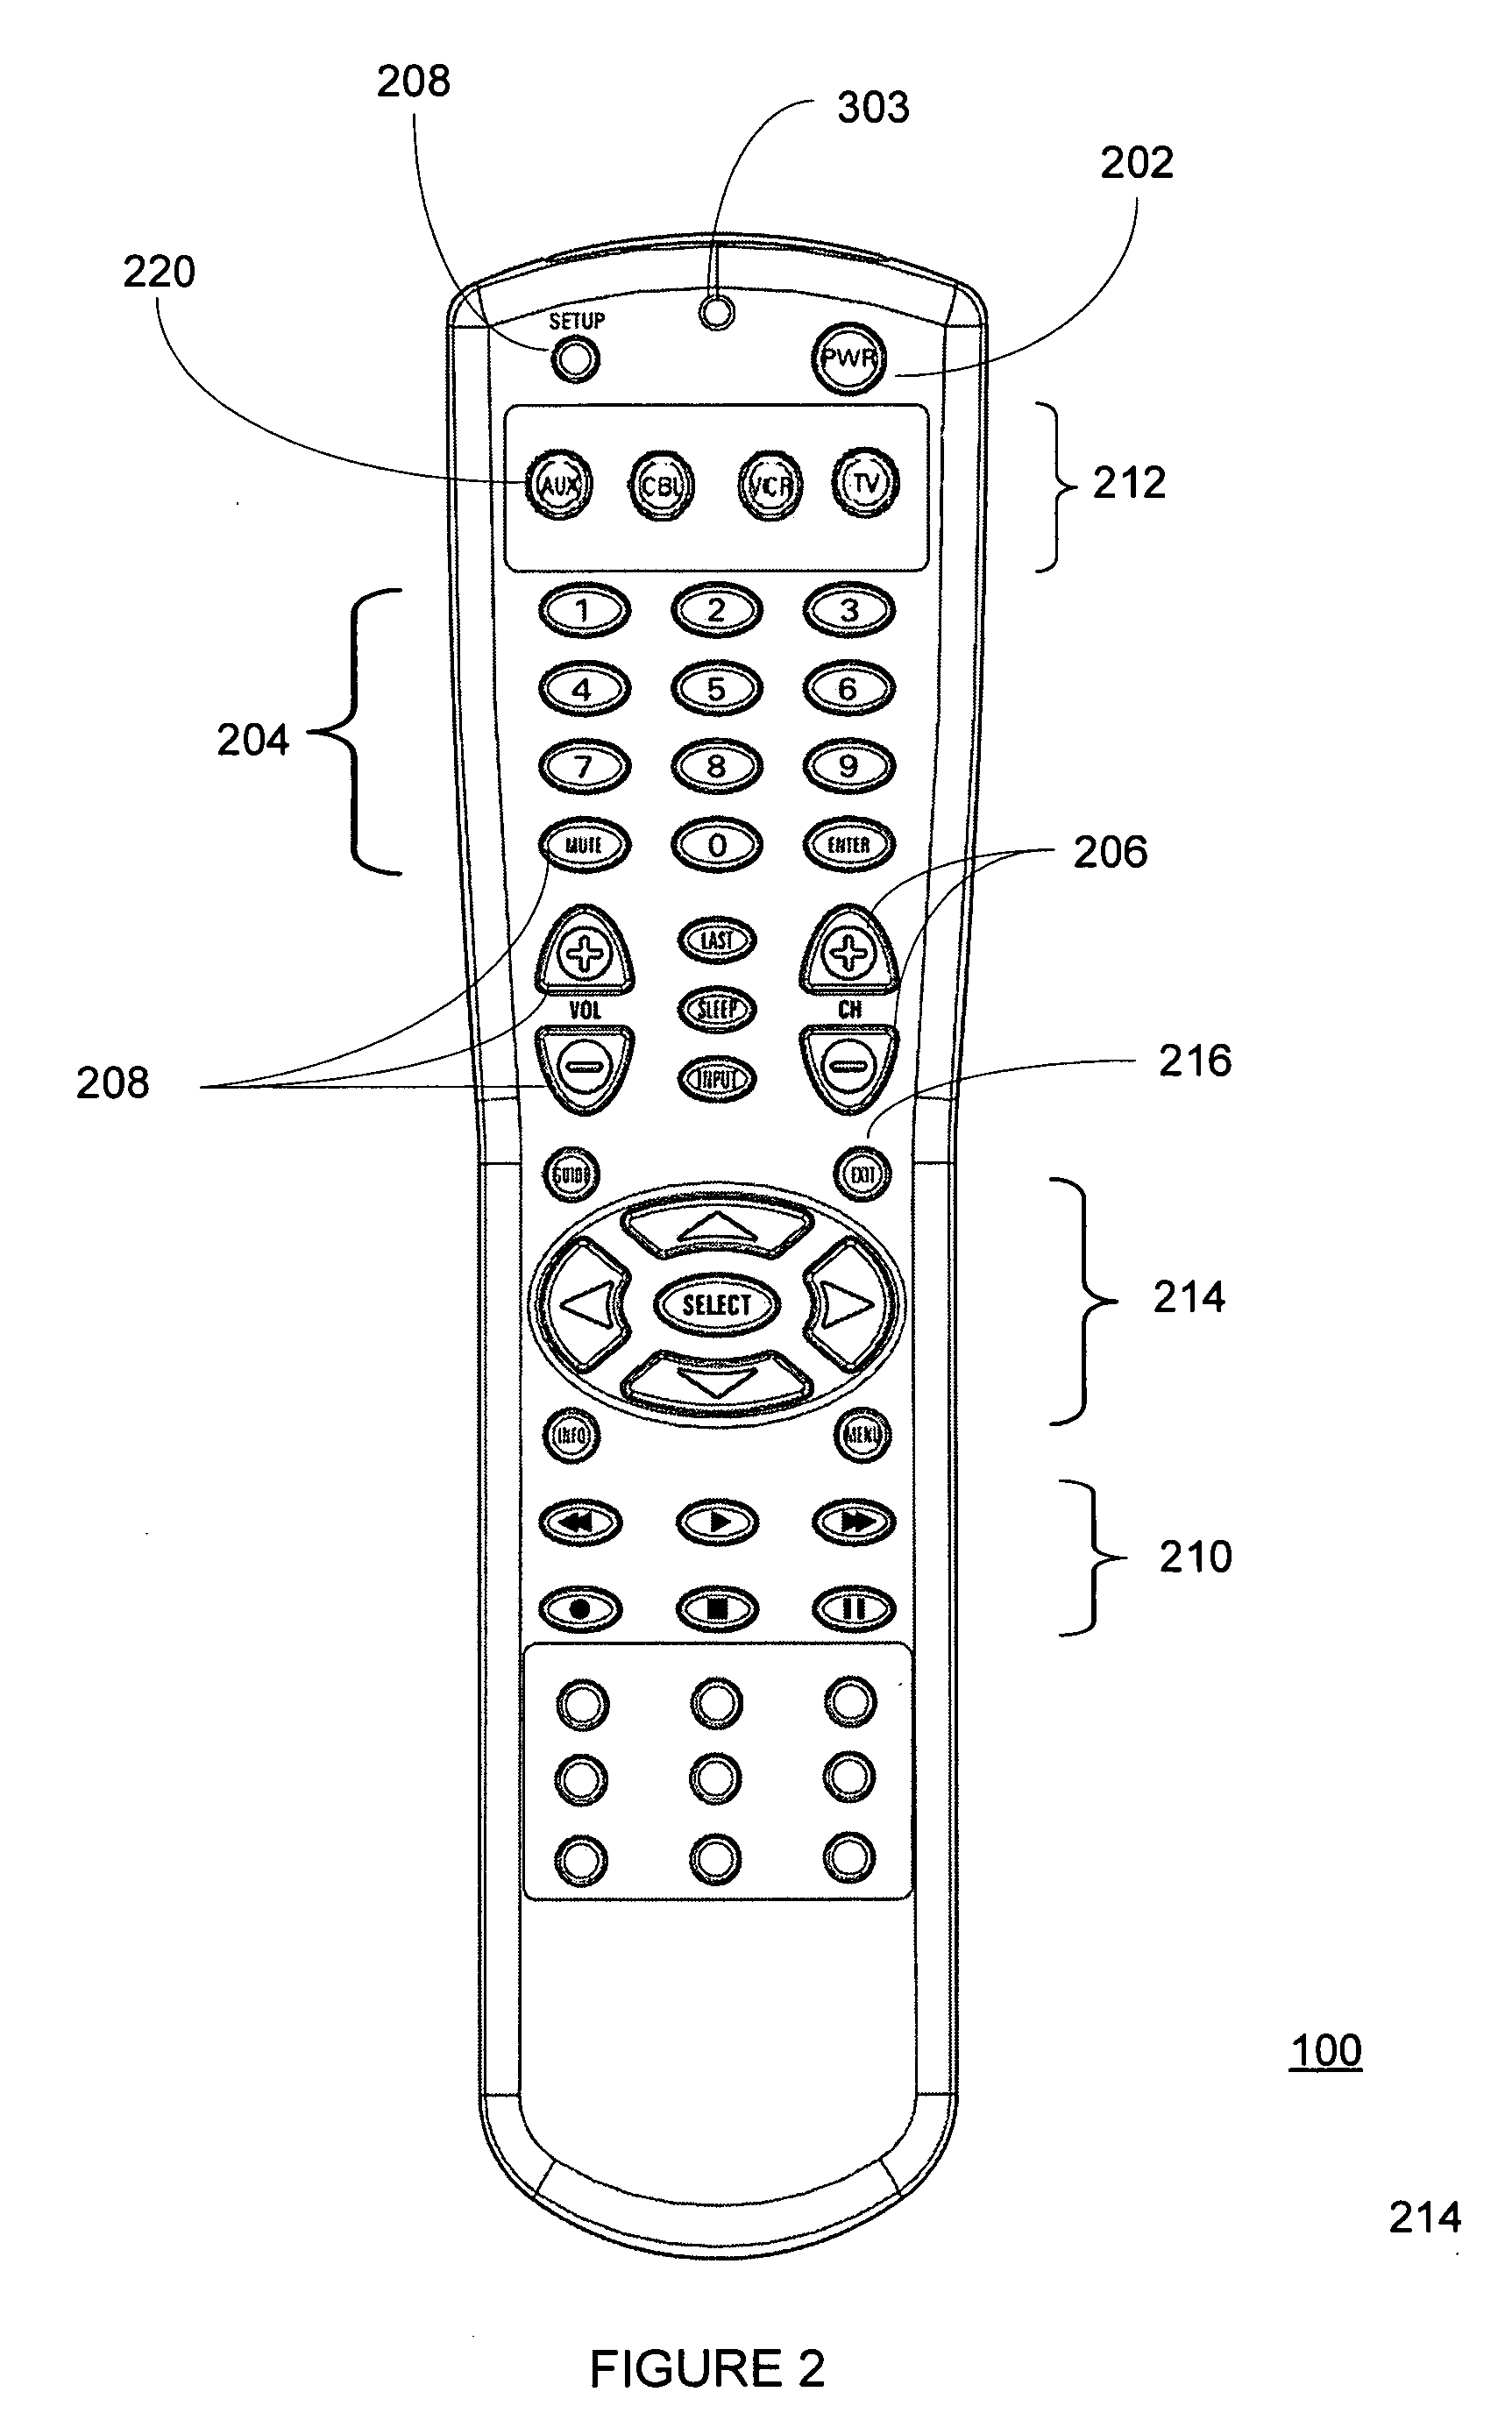 System and method for simplified setup of a universal remote control